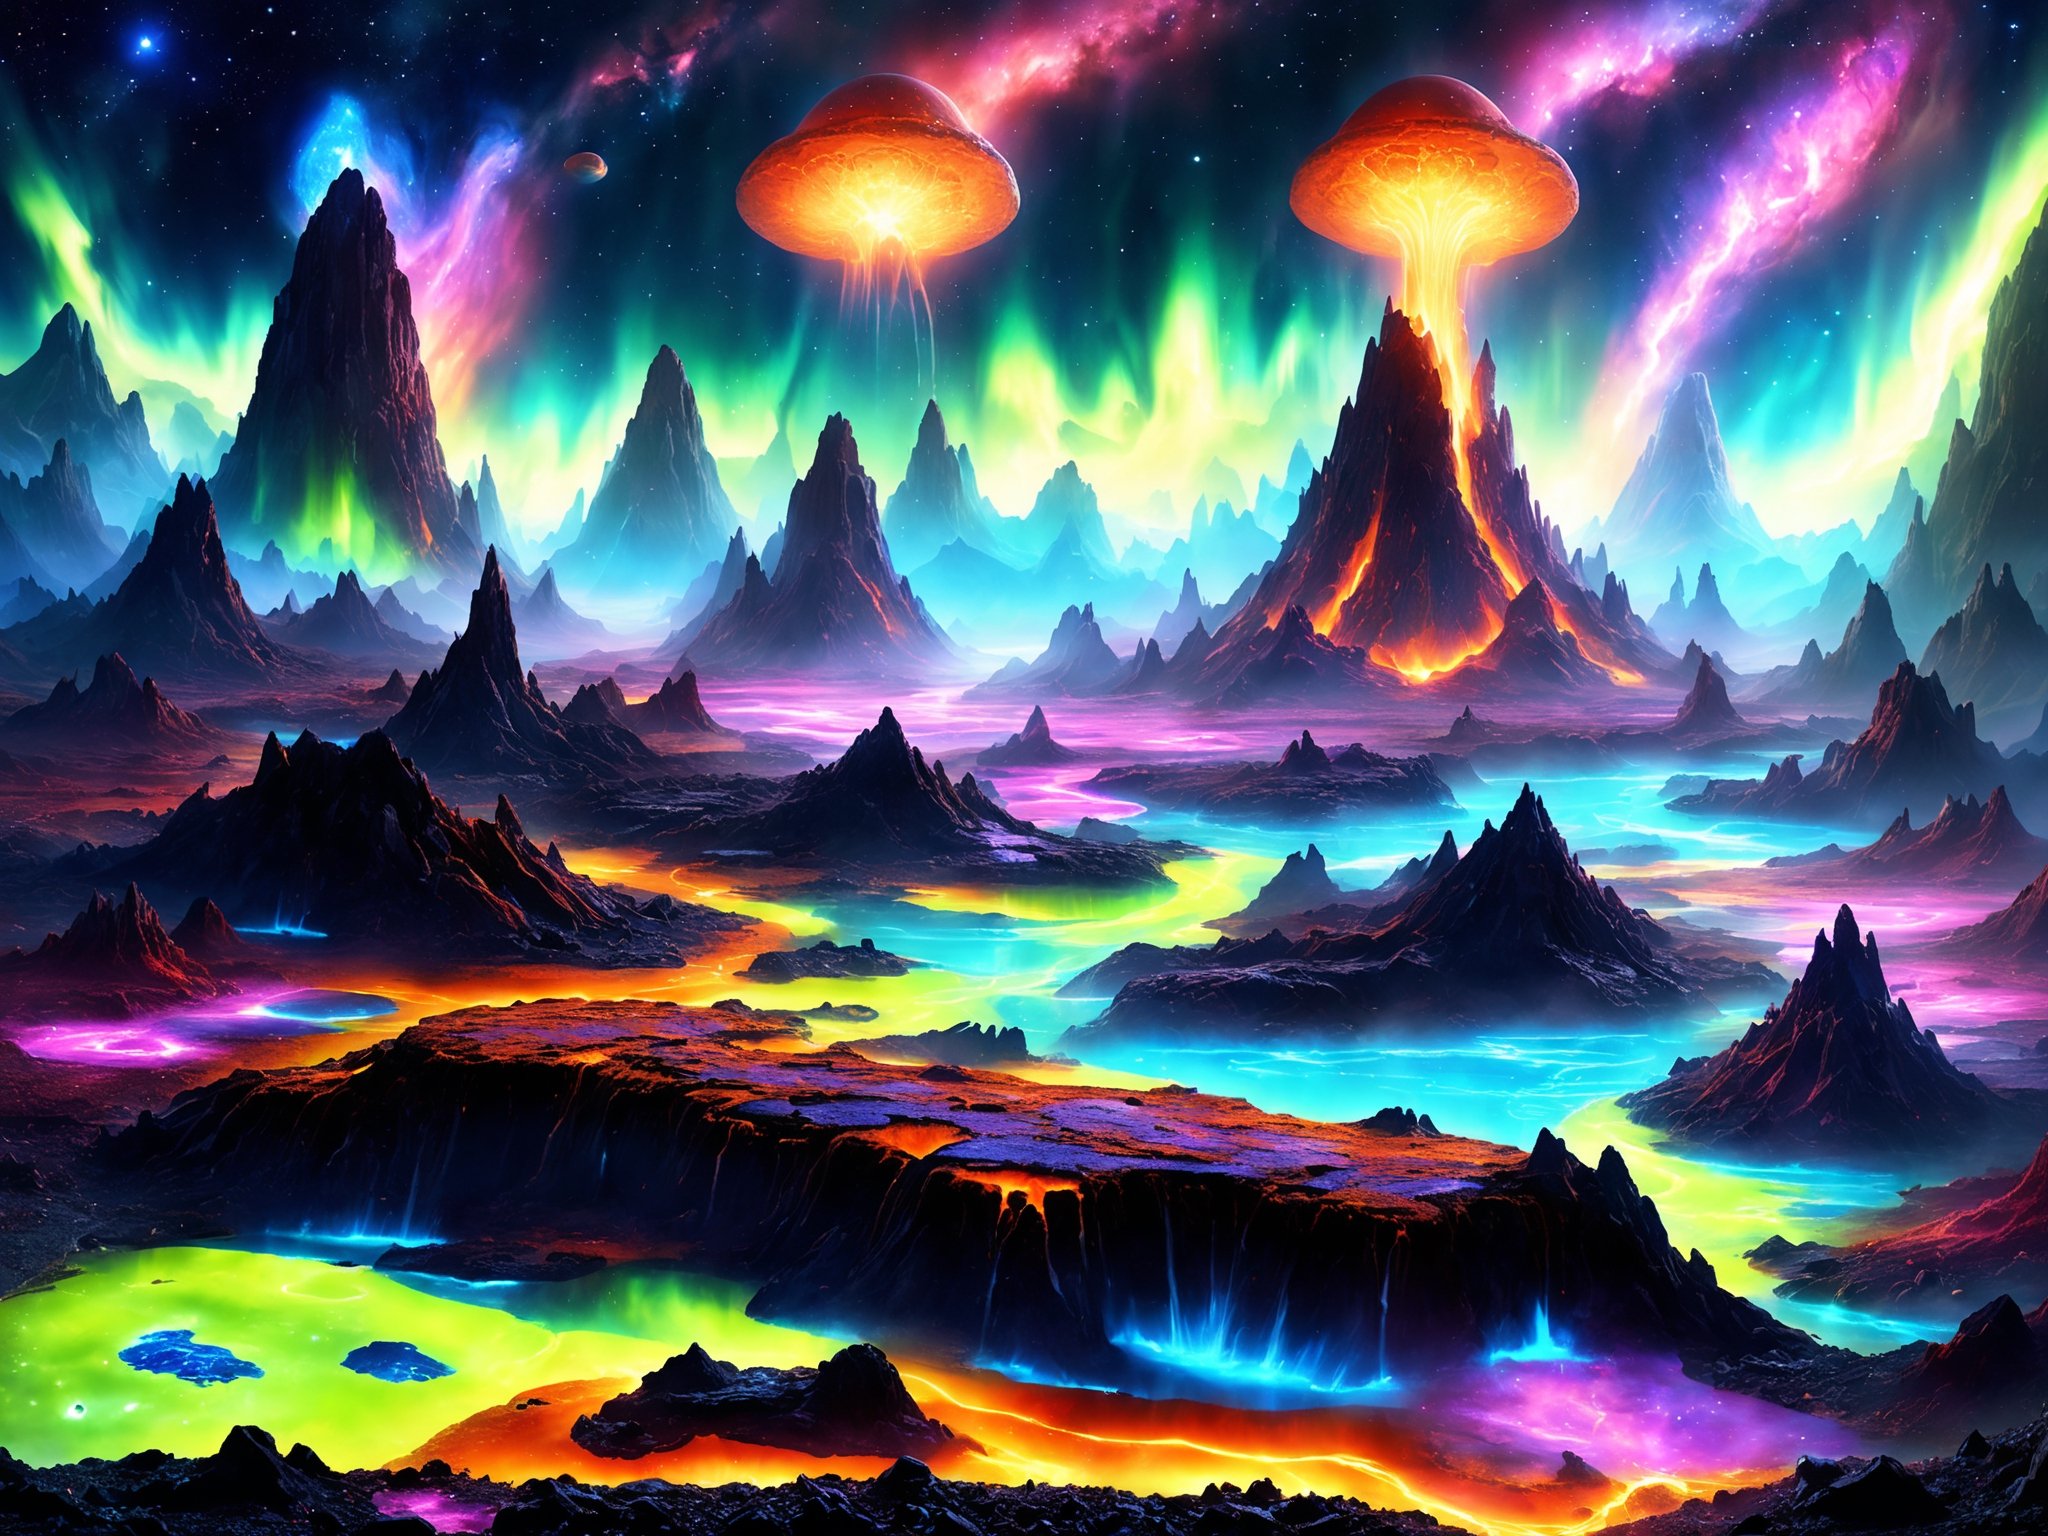 A distant world, a strange psychedelic partially volcanic scene, remnants of an ancient civilization, (ruins and crumbled monuments), (desolate yet vivid bizarre otherworldly plant life reclaiming a once apocalyptic alien wasteland), ((beautiful auroras in the star filled night sky)), (craters and visible signs of ancient destruction now overgrown and filled with strange colored toxic liquid), ((ambient soft bioluminescent glow from mutated plant life so weird and alien)), (bubbling geysers and magma oozing up from cracks in the ground),
a truly unique original breathtaking vast grandiose scene of an alien world once populated but now an apocalyptic ruin, being reclaimed by the flora that survived and mutated to survive and thrive, in the dead of night, illuminated only by the glow of the overgrowth and the brilliant auroras shimmering in the night sky, vivid rich intense colors, hyperrealistic surreal Precisionistic psychedelic landscape scenery, Psychedelic alien worlds ,Fizzlespell style ,Sprawling cosmic colorscapes 